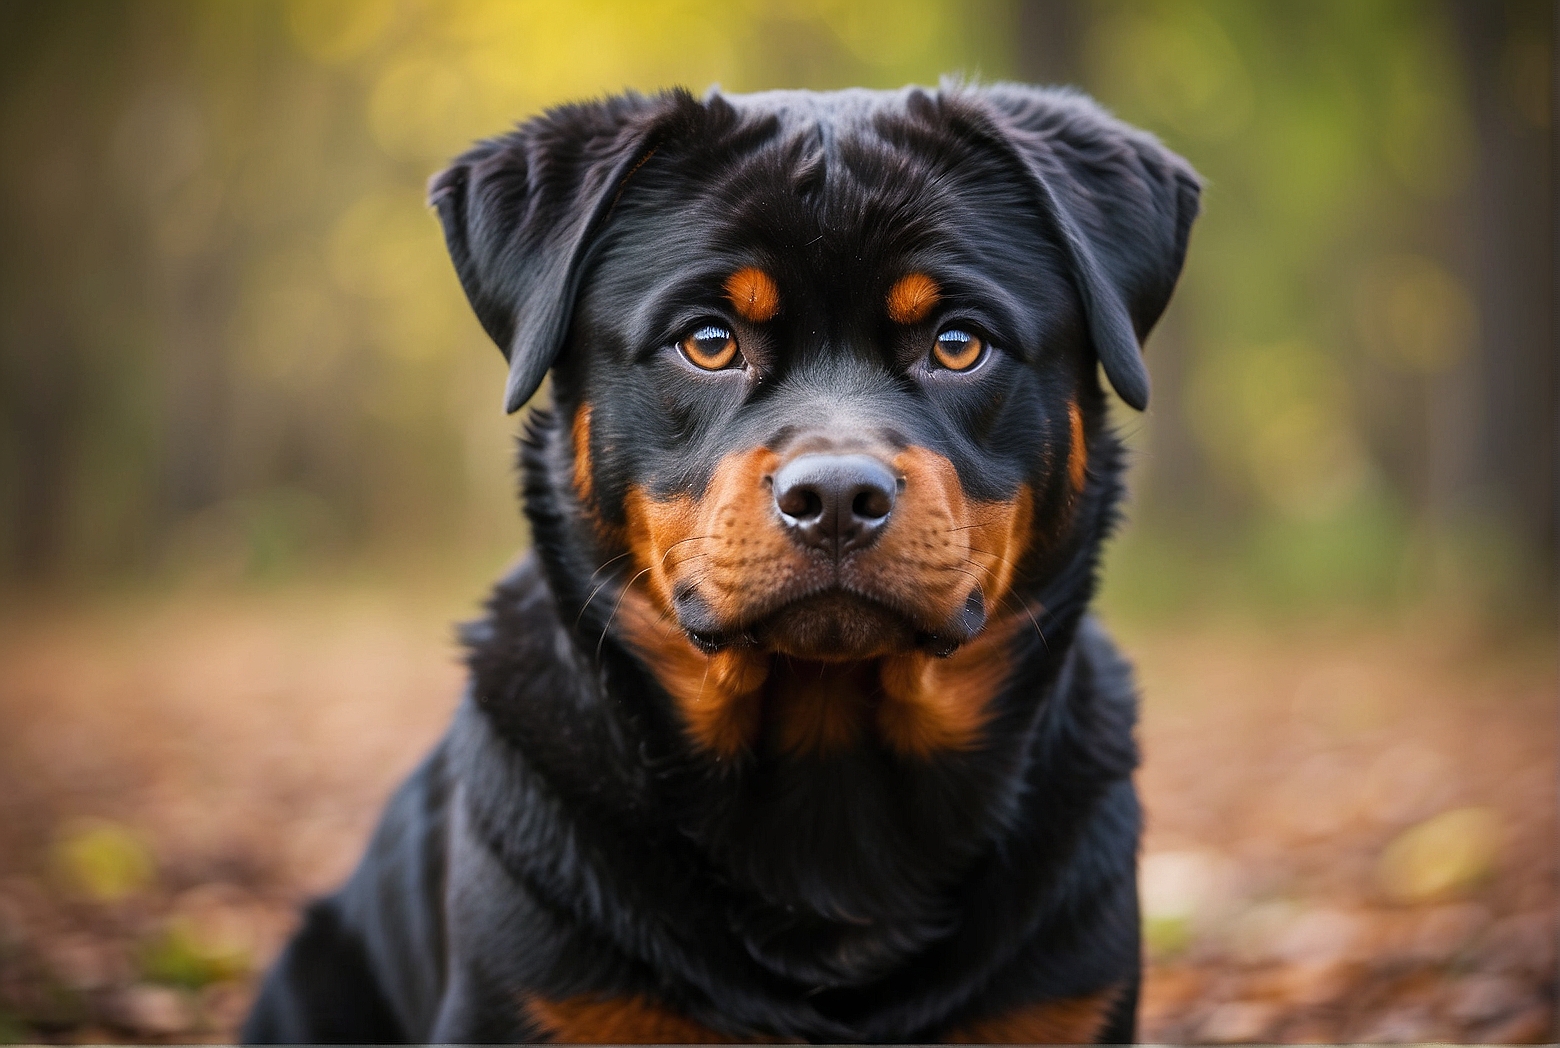 Exploring the Eye Color of Rottweilers